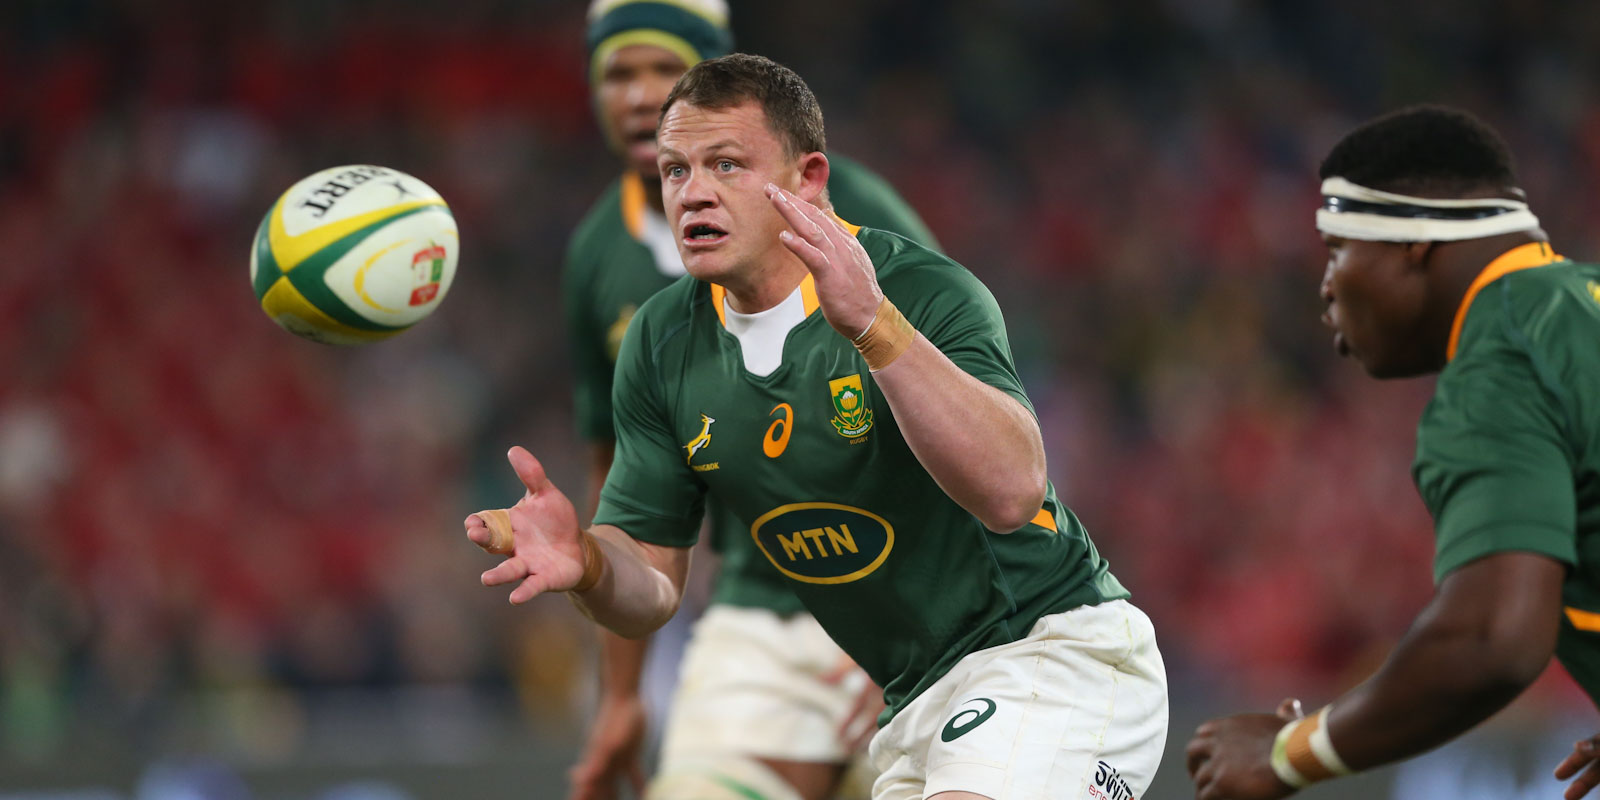 Deon Fourie on debut for the Springboks.